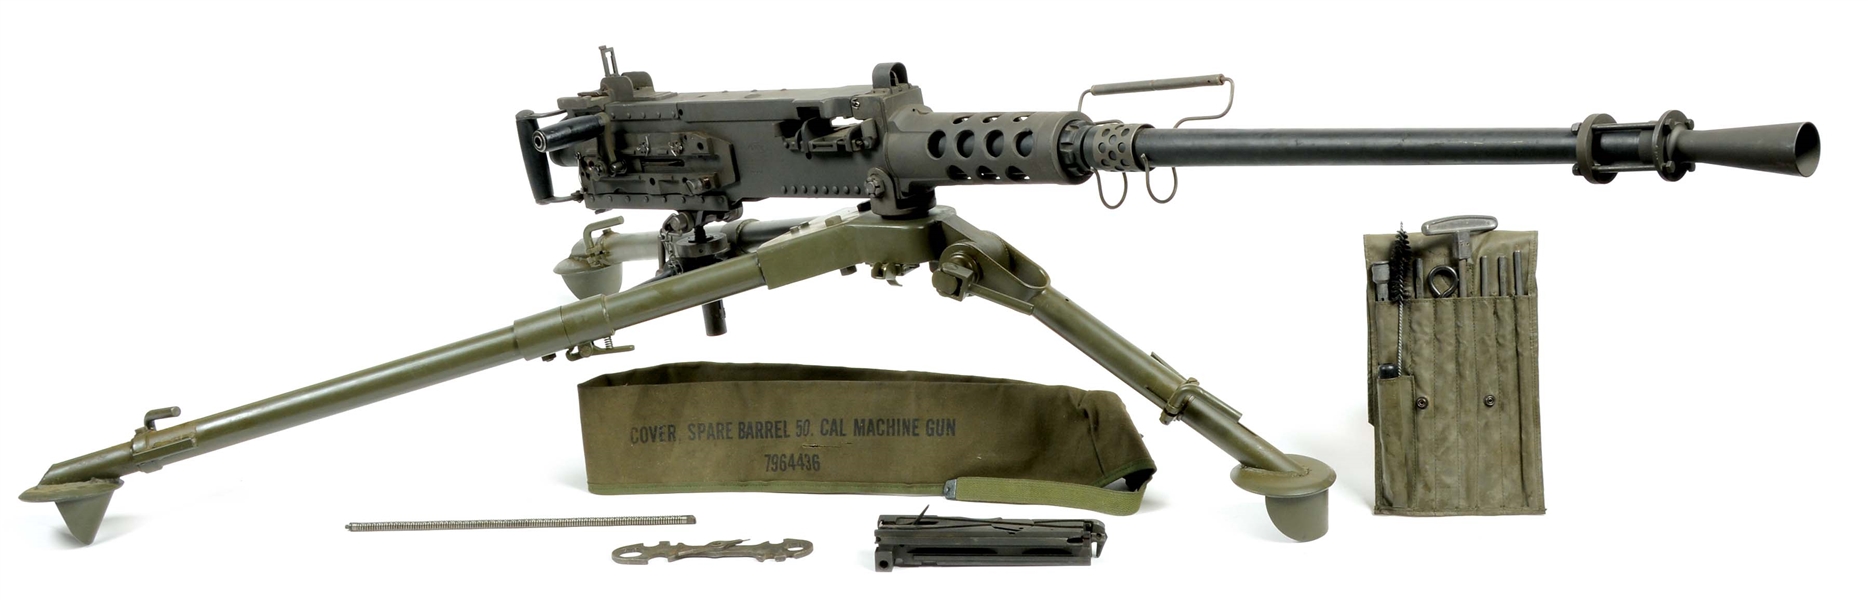 (M) TNW INC. BROWNING M2HB SEMI-AUTOMATIC RIFLE WITH ACCESSORIES.